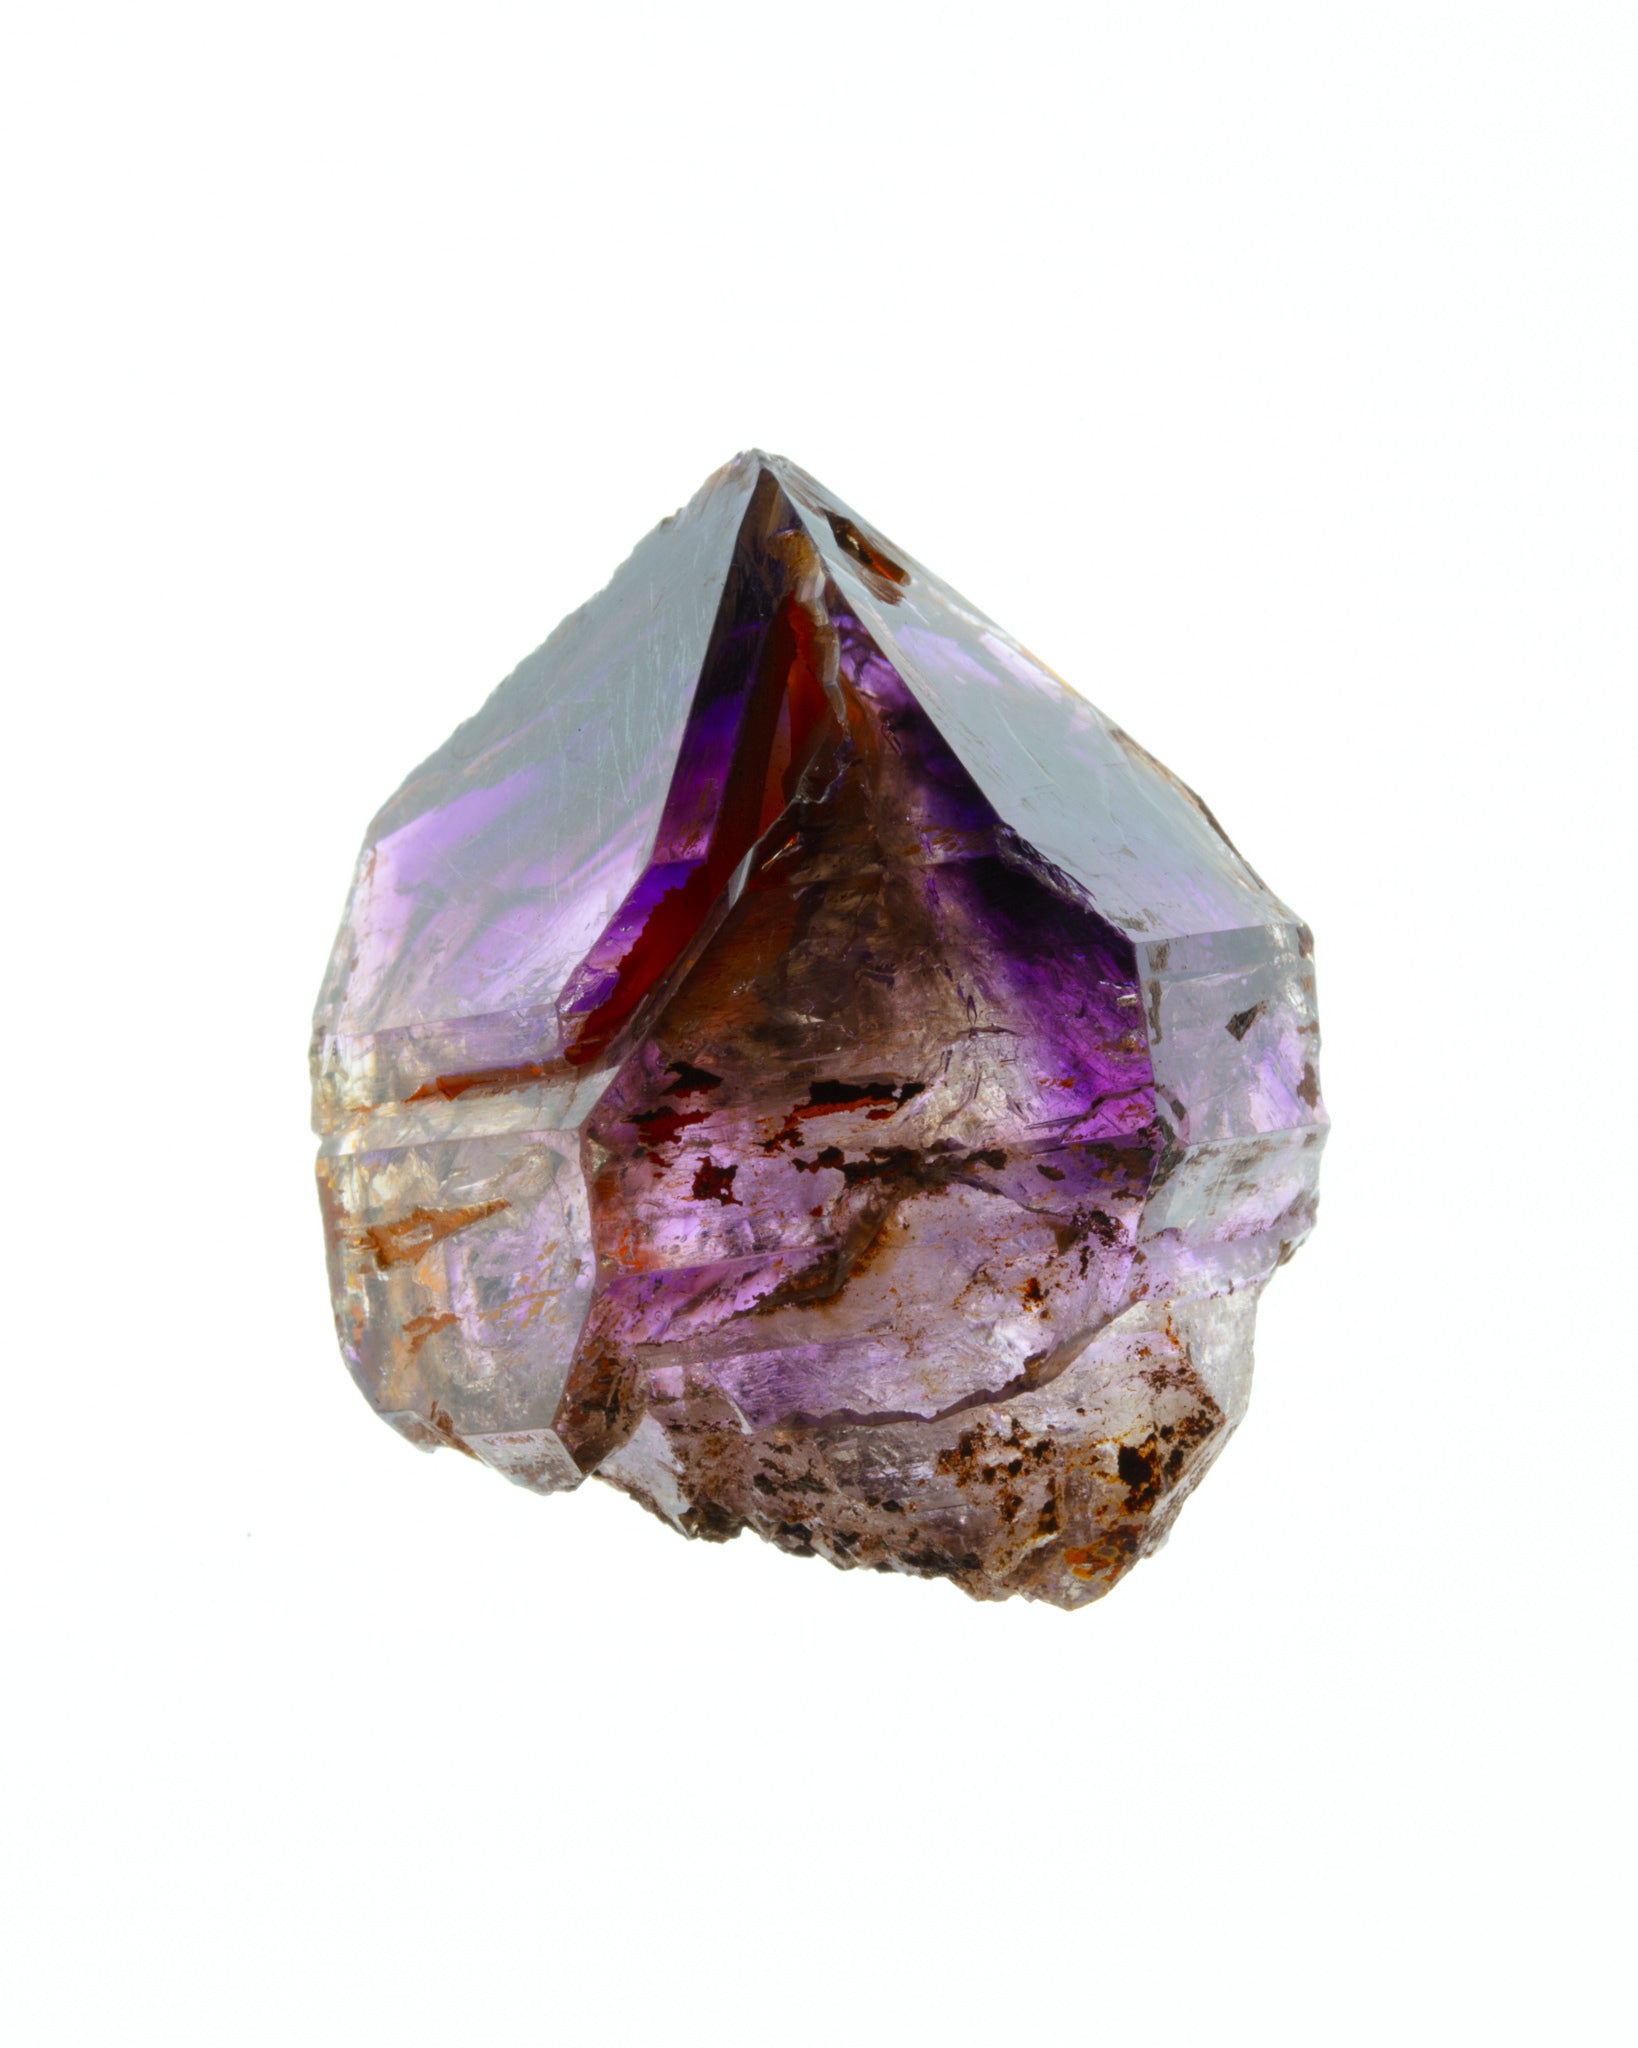 2: 1.42 x 1.66 x 1 inches - 42 g - $500 | Contains phantoms deeply within the crystal. Slightly chipped, but a very intensely hued smoky amethyst. A powerful stone.